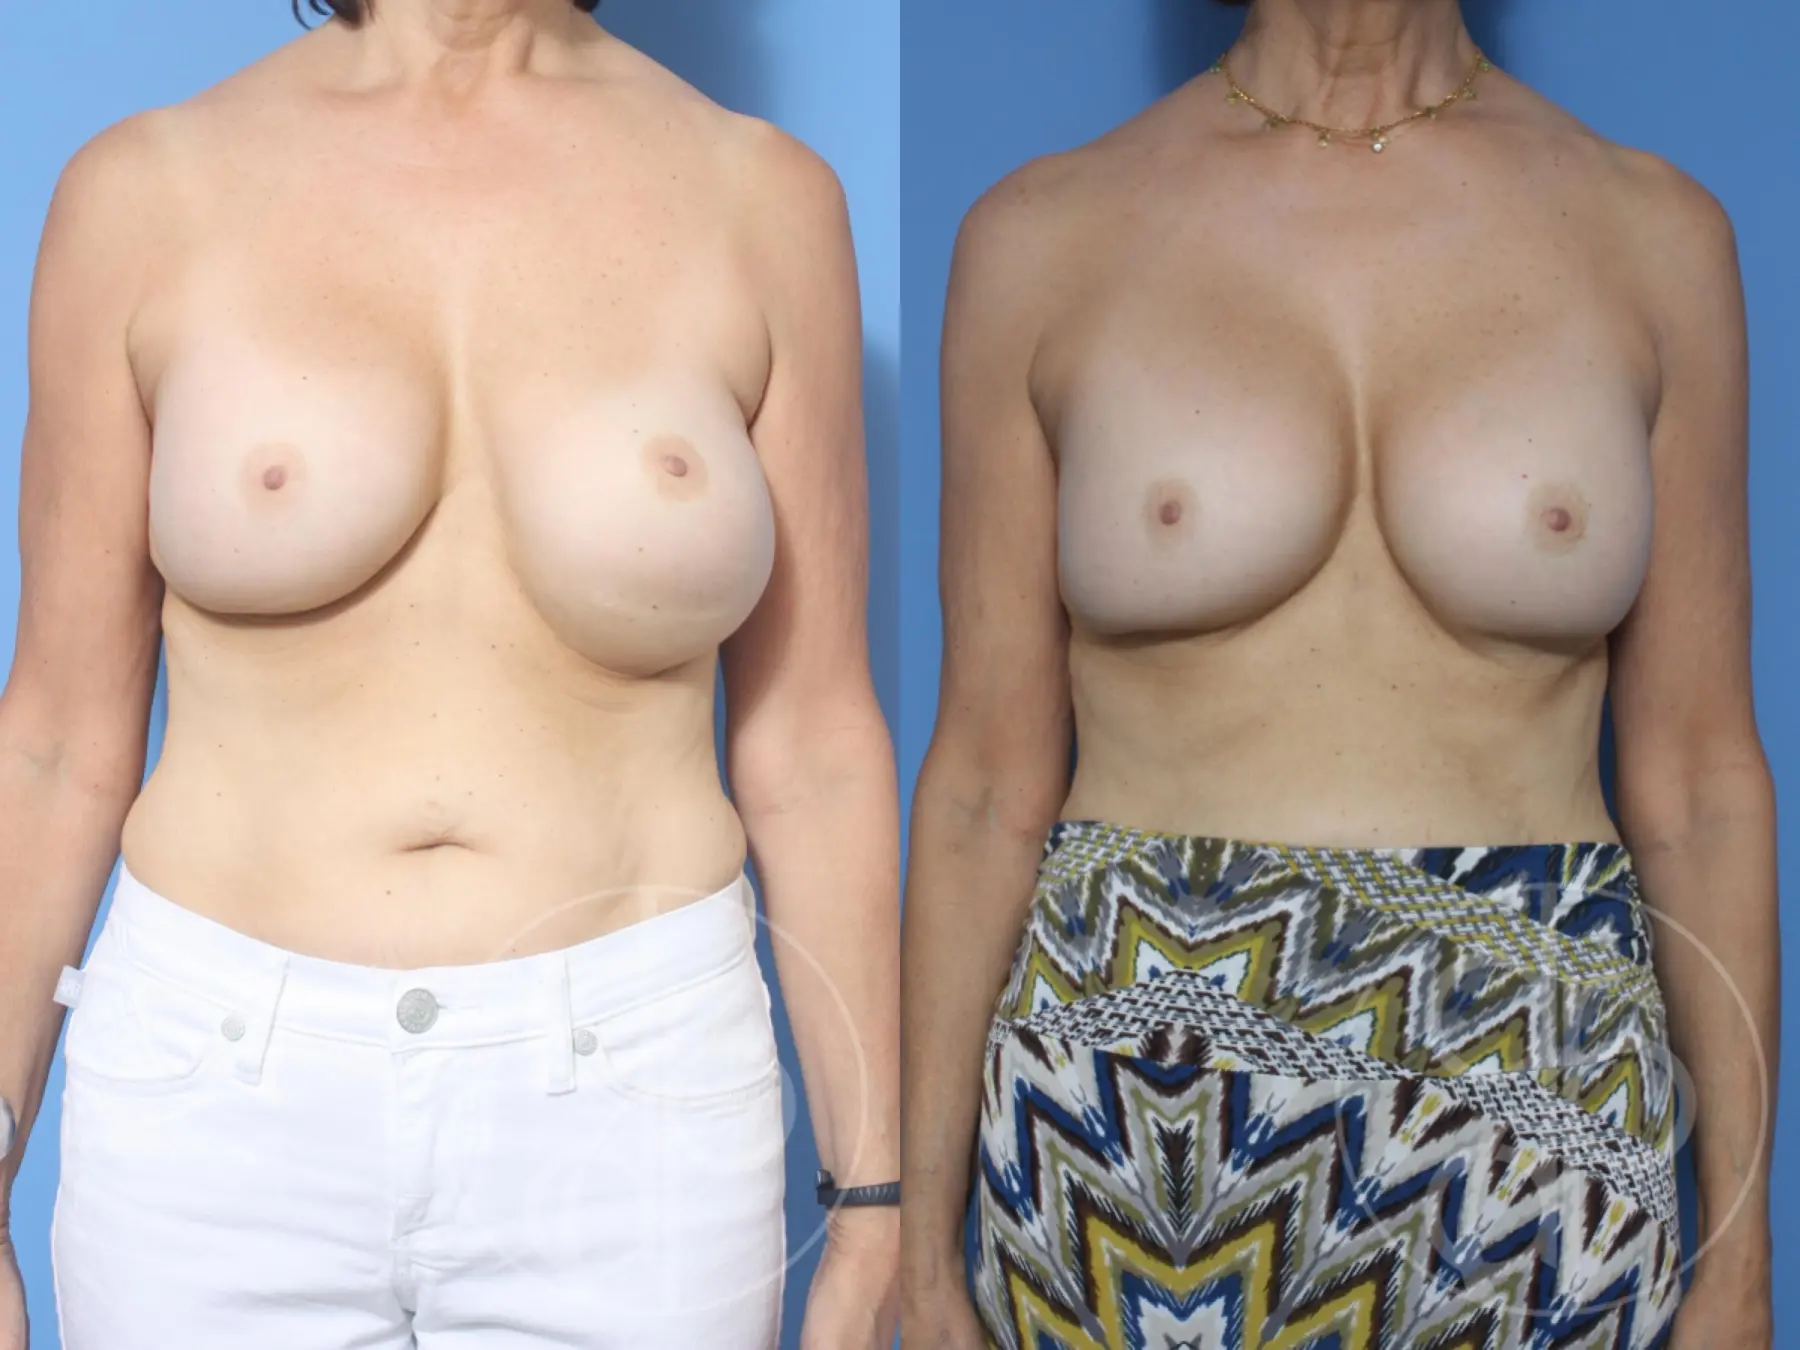 patient 12179 remove and replace breast implants before and after result - Before and After 1